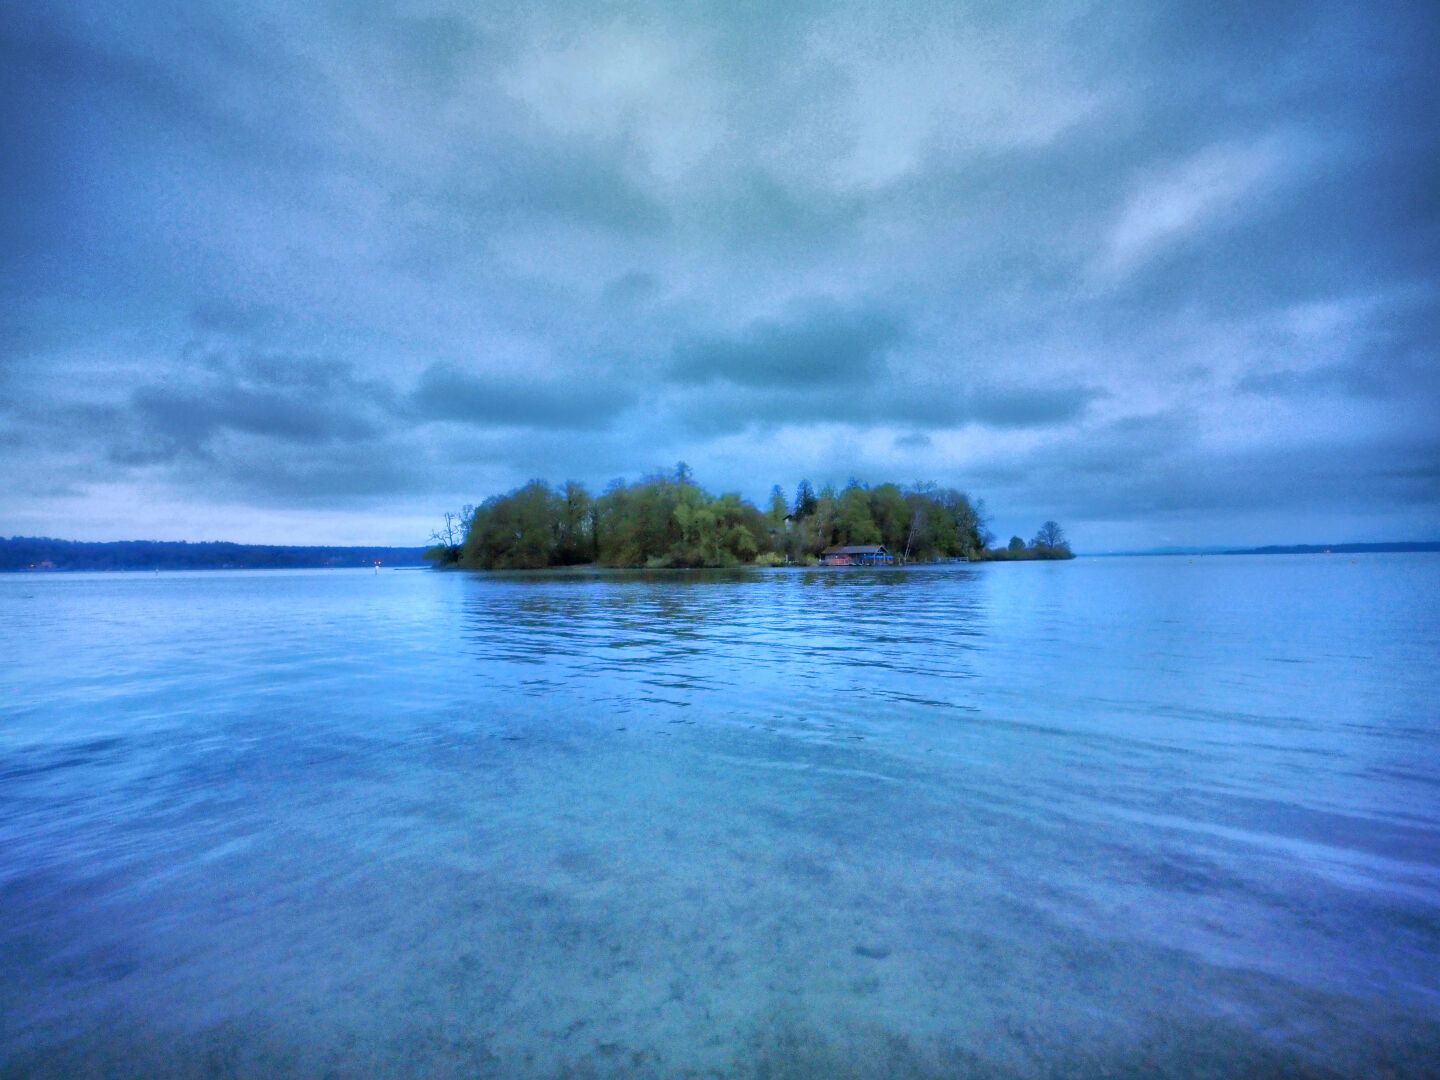 The Rose Island in Lake Starnberg

The oldest evidence of humans on the Rose Island dates back to the Neolithic period. Today the island is a tourist destination for weekend trippers from Munich and the surrounding area.

#seascape #lakestarnberg #bayern #photography